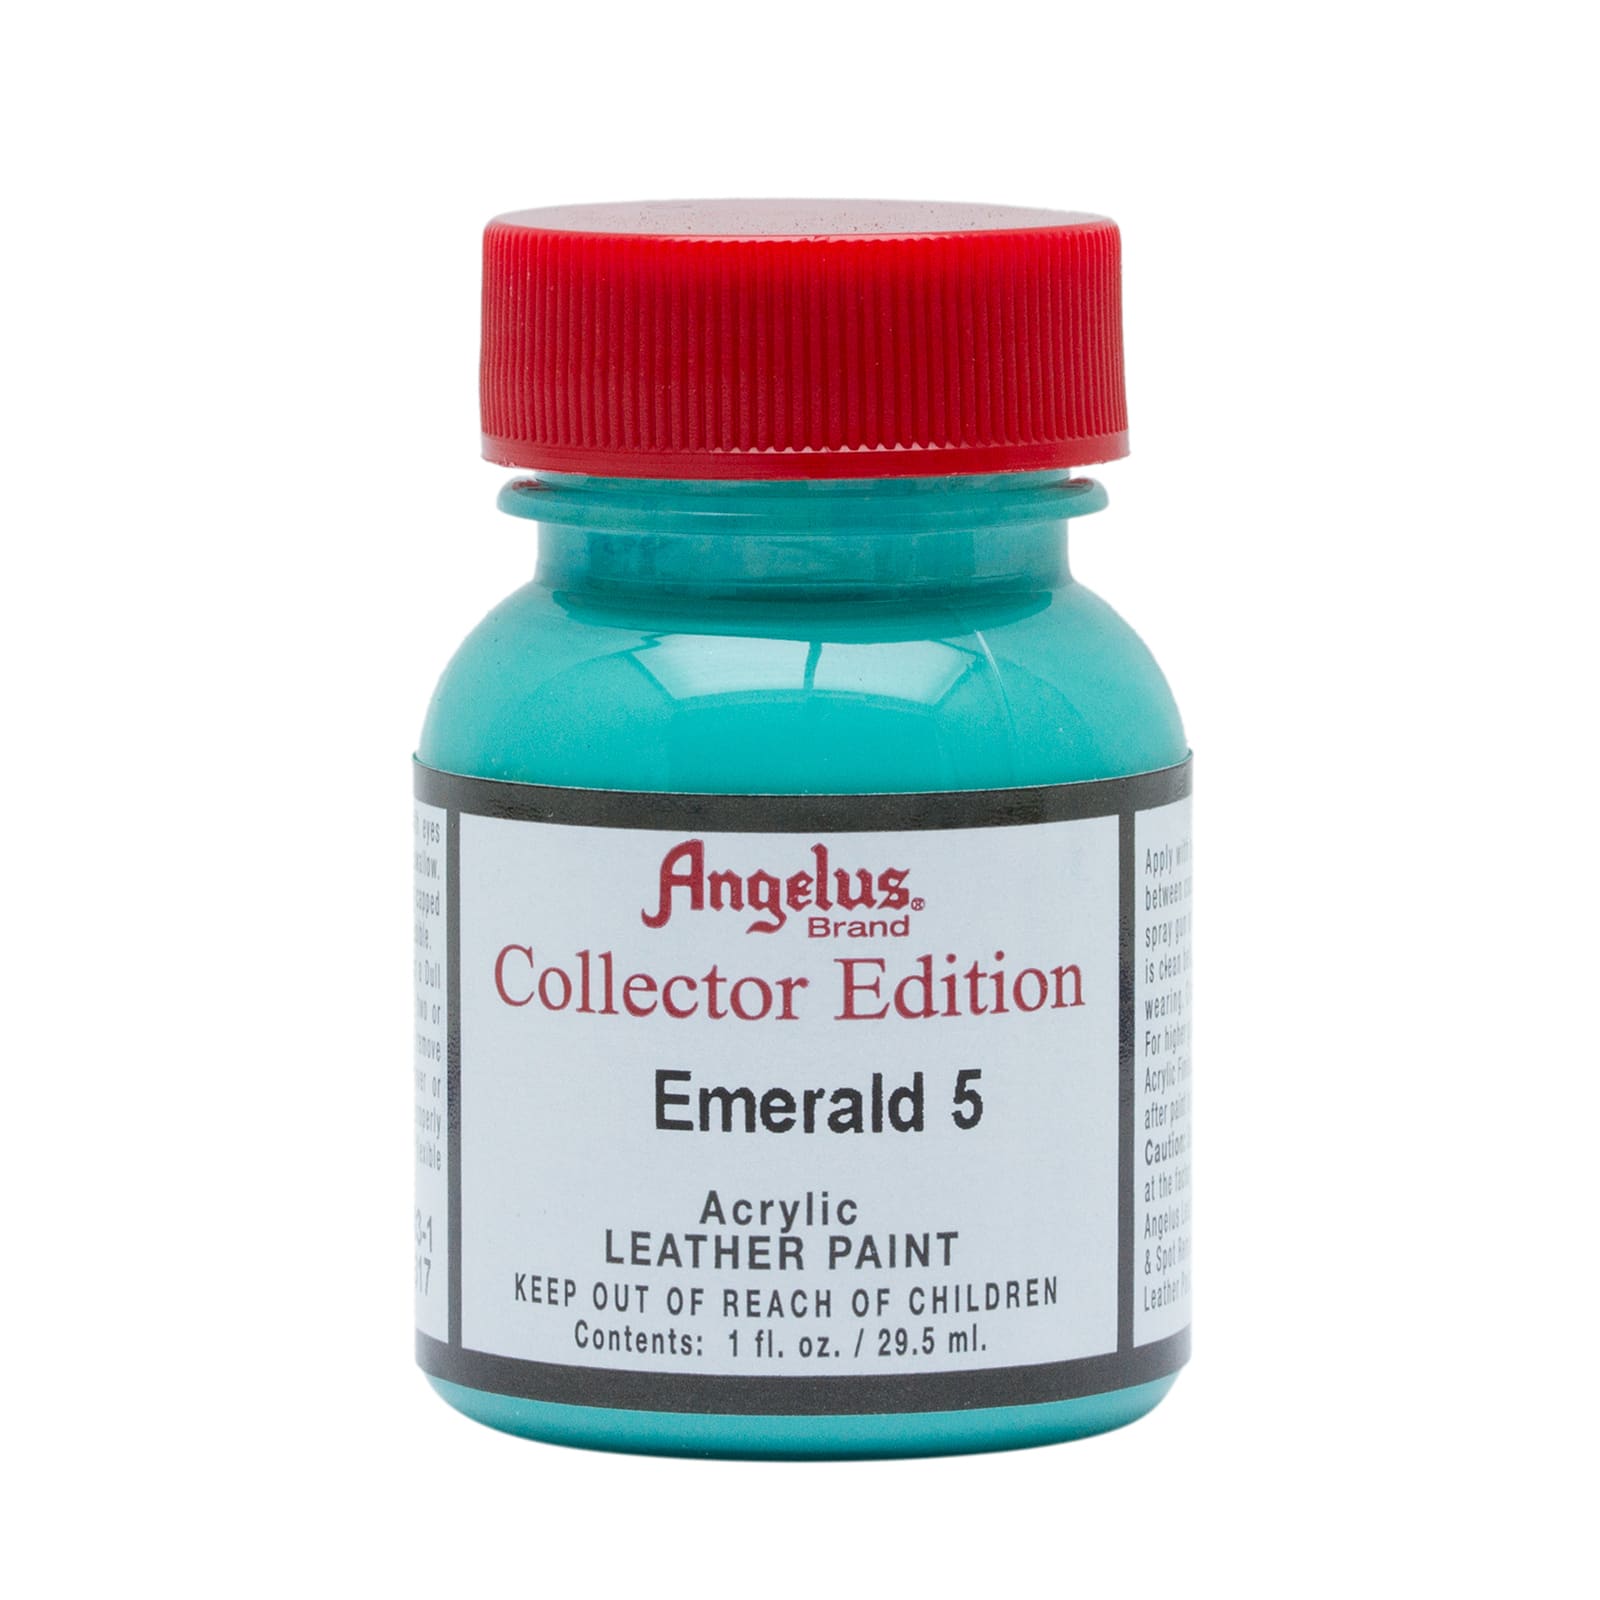 Angelus Acrylic Leather Paint Collector Edition 1oz White Cement/Grey 4